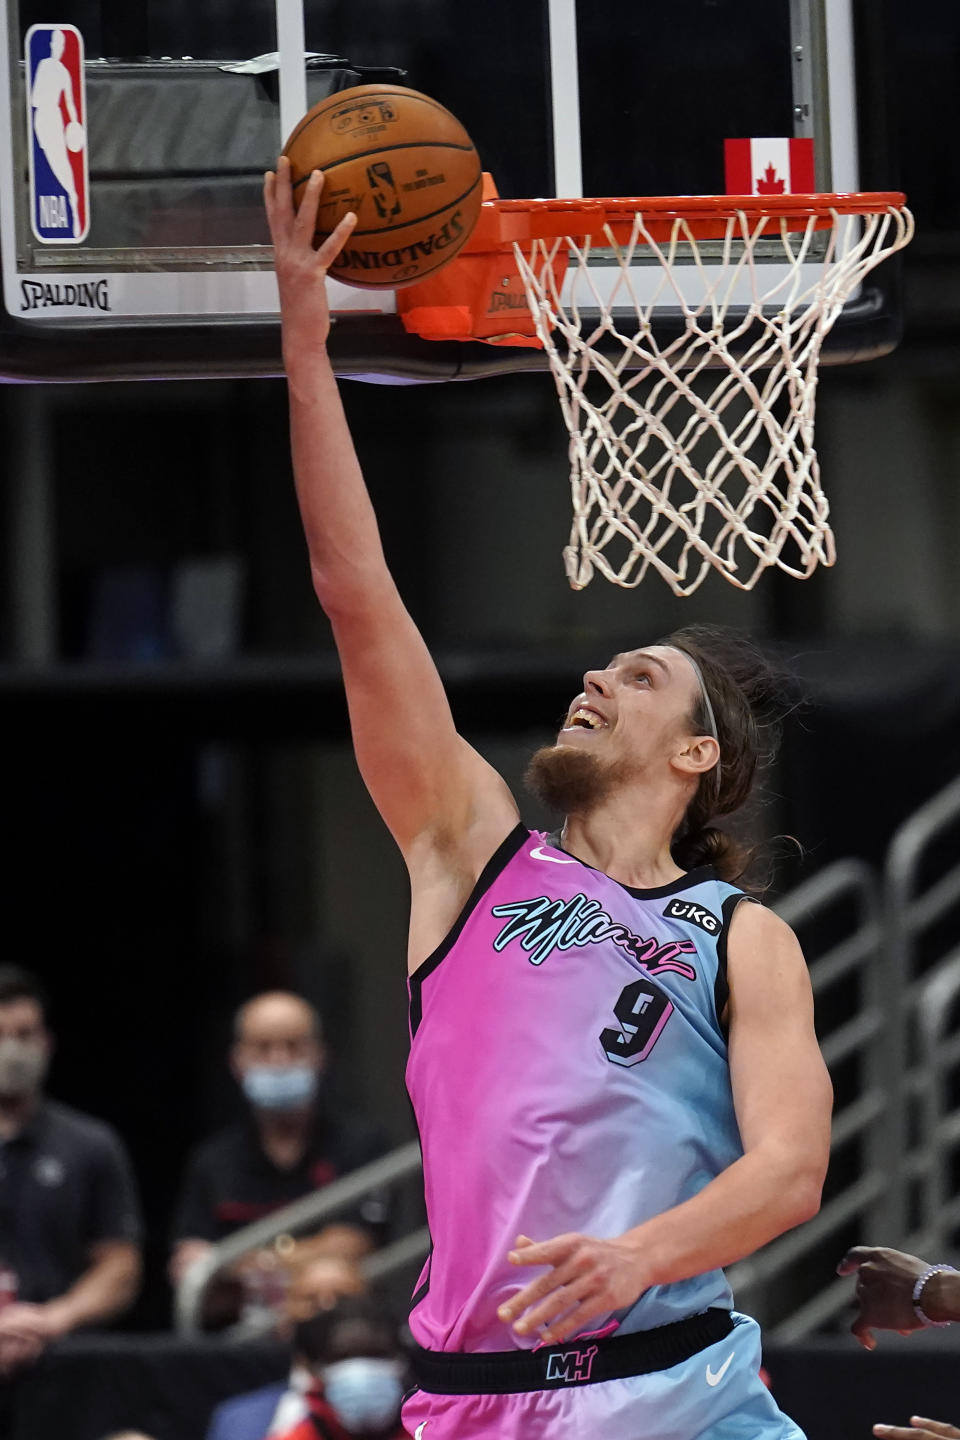 Miami Heat forward Kelly Olynyk (9) goes for a layup against the Toronto Raptors during the second half of an NBA basketball game Wednesday, Jan. 20, 2021, in Tampa, Fla. (AP Photo/Chris O'Meara)